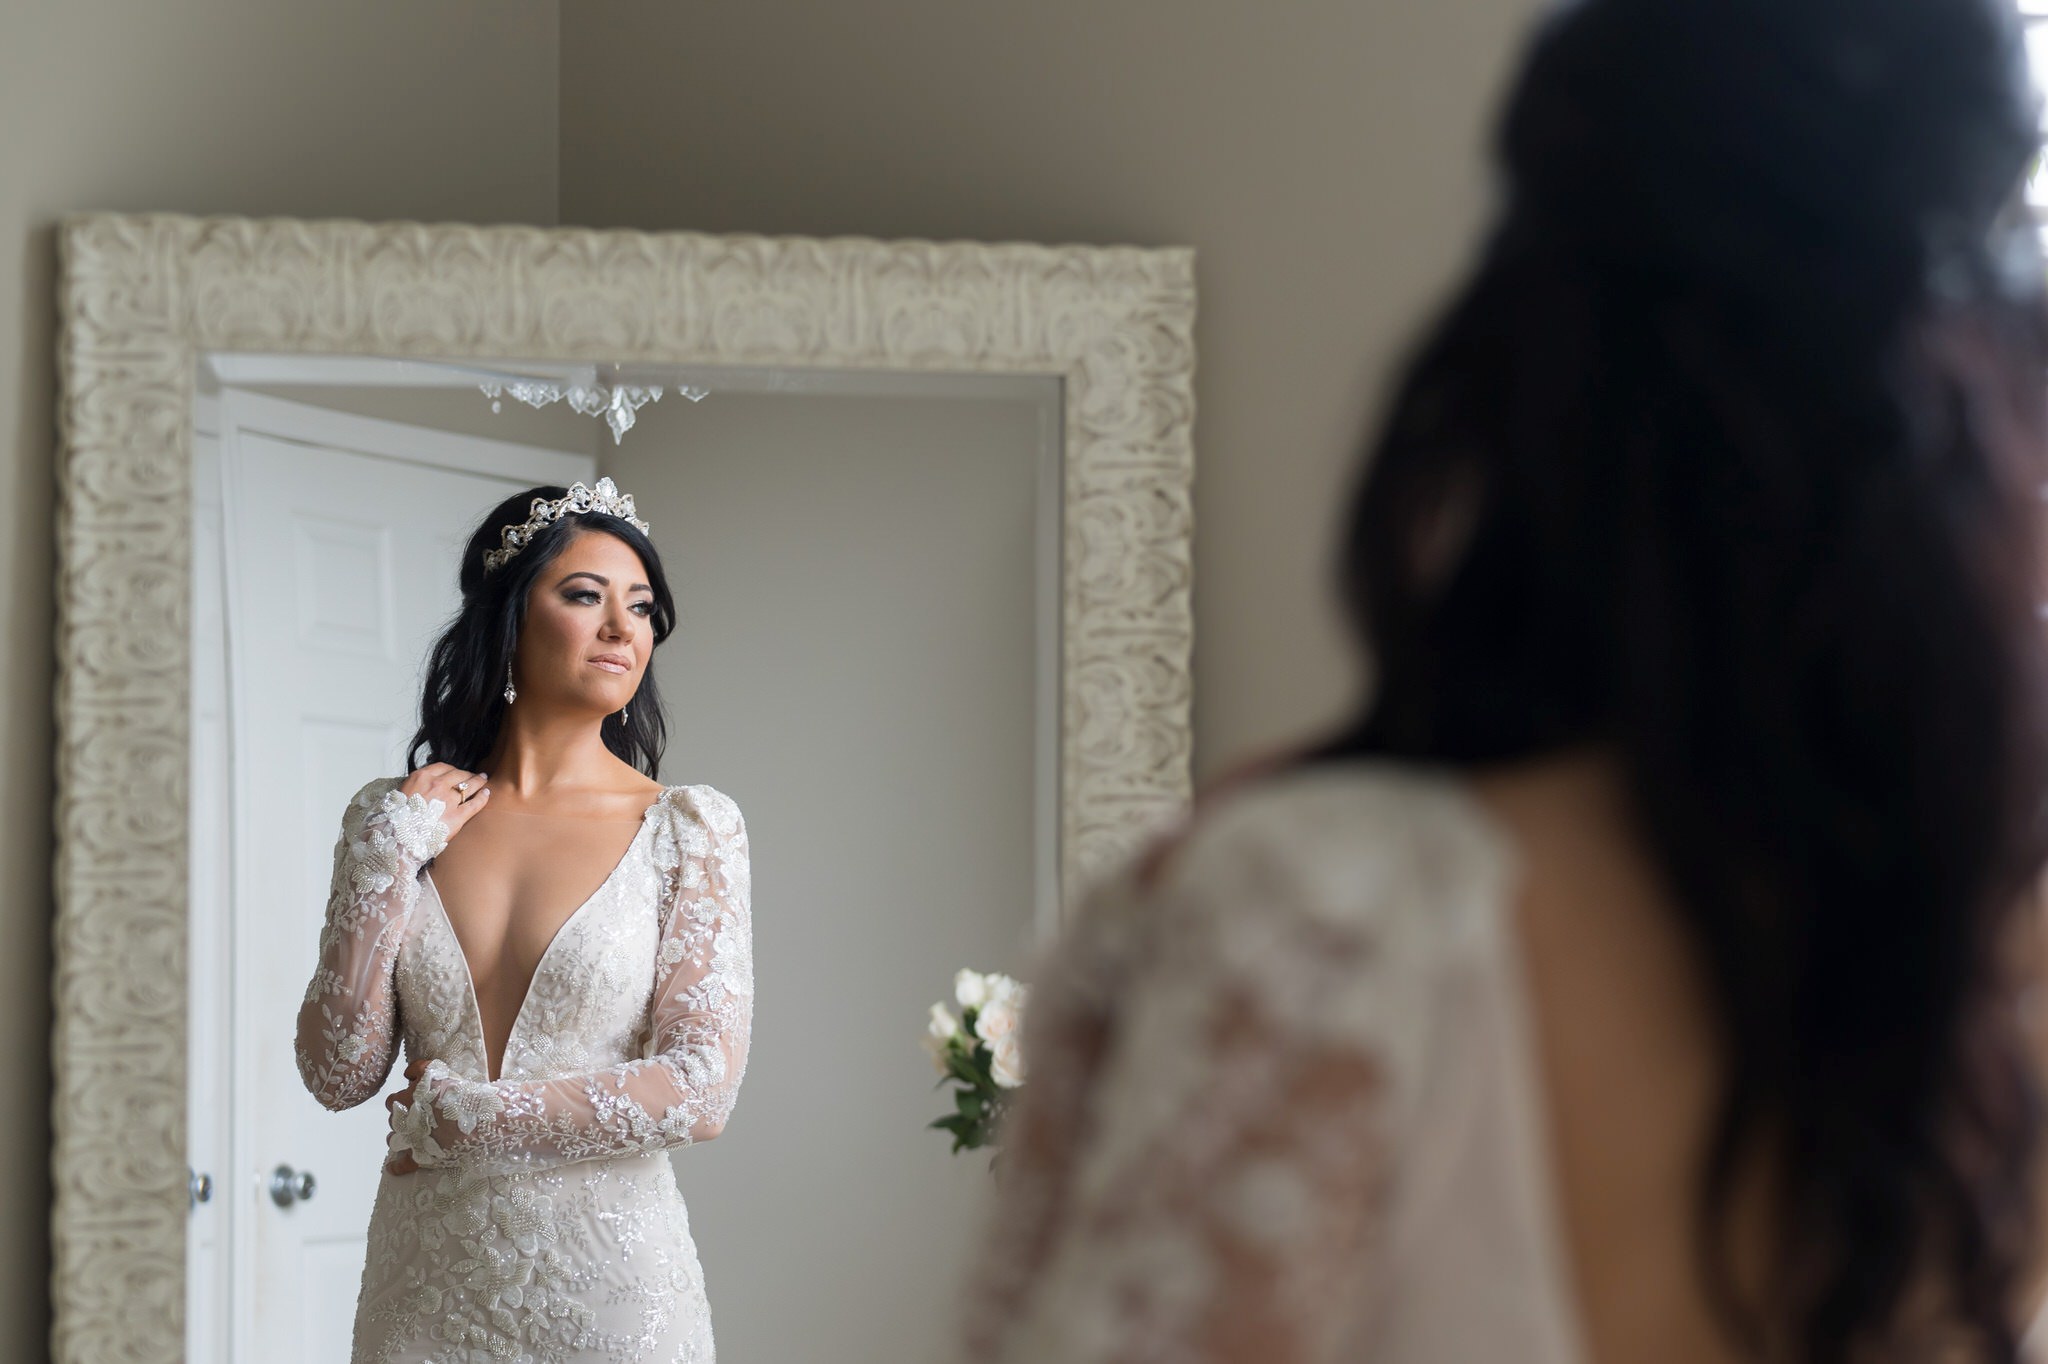 A reflection of a bride in a mirror as she looks outside on her wedding day.  